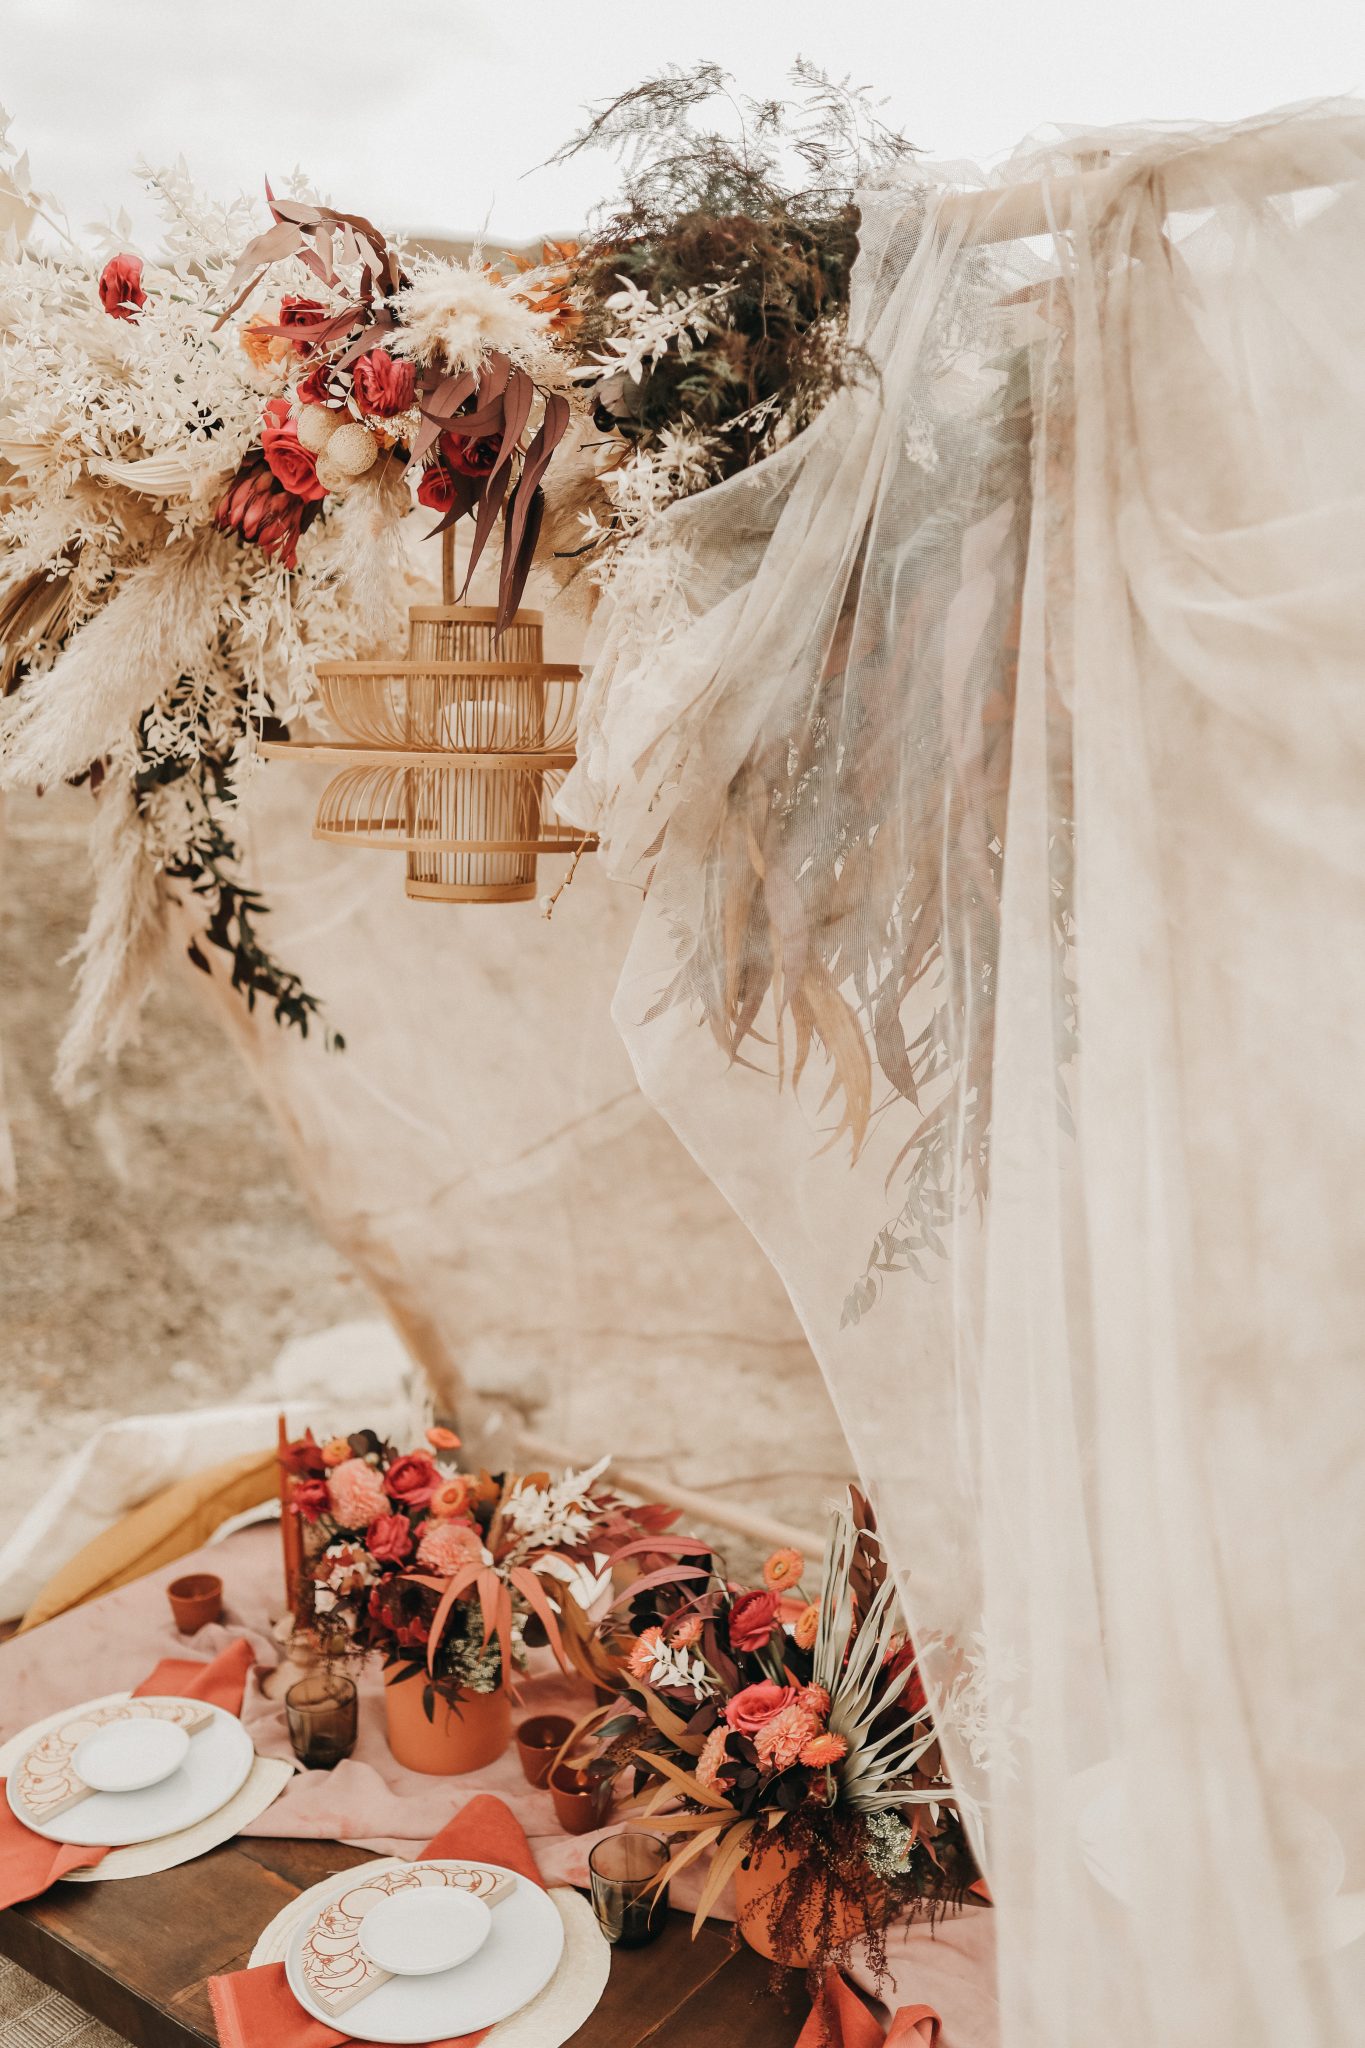 Moroccan elopement inspiration with a linen tent, wicker chandelier and boho terracotta flowers